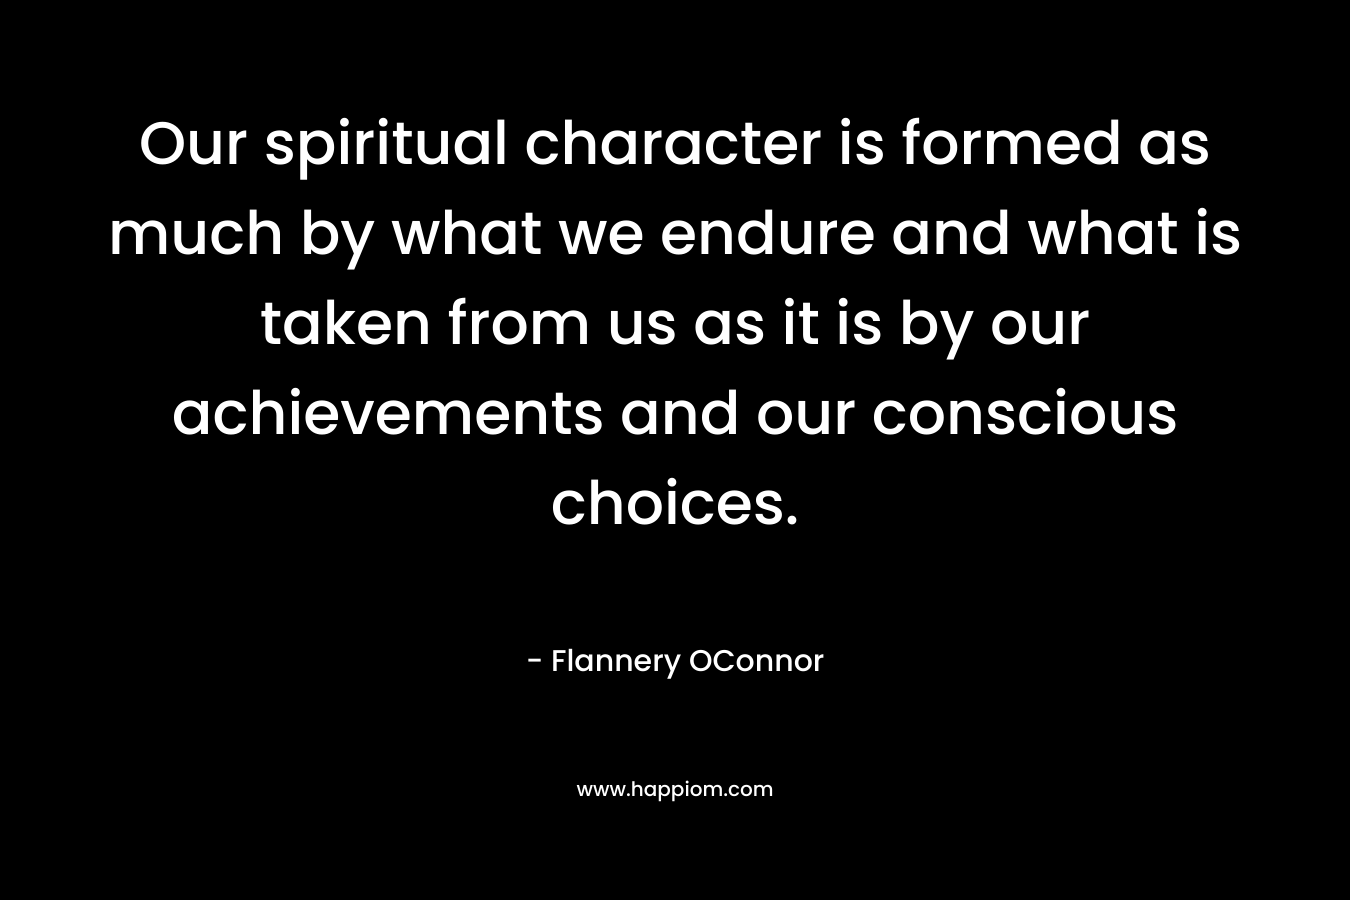 Our spiritual character is formed as much by what we endure and what is taken from us as it is by our achievements and our conscious choices.